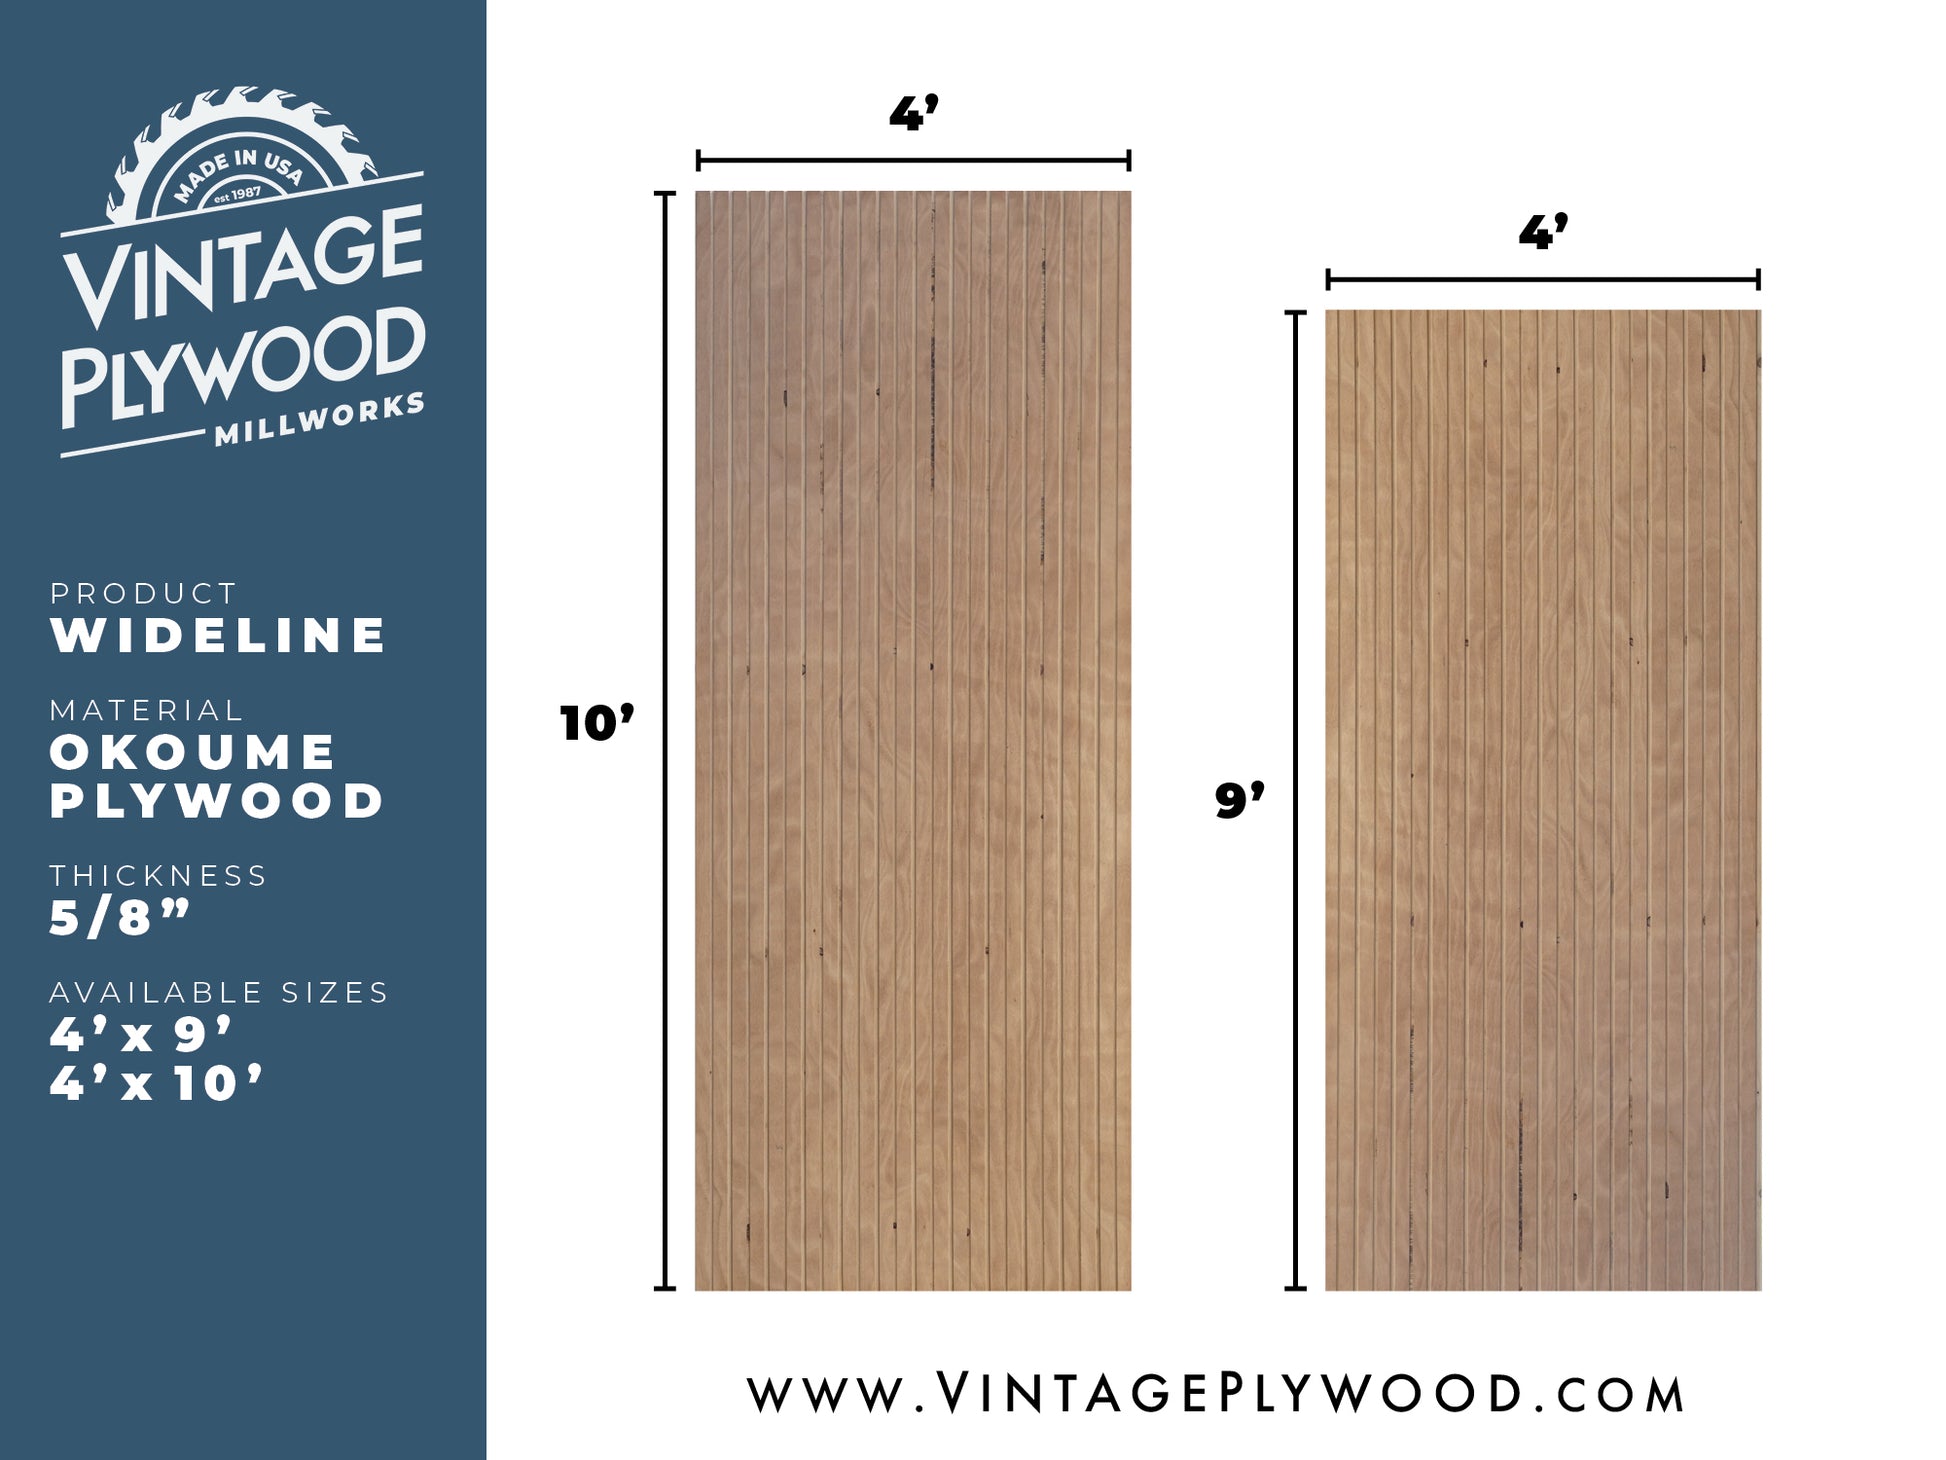 Spec sheet of Wideline patterned plywood consisting of a 3/8" groove, 2" on center, commonly used as siding and paneling on Eichler homes and other mid-century modern design